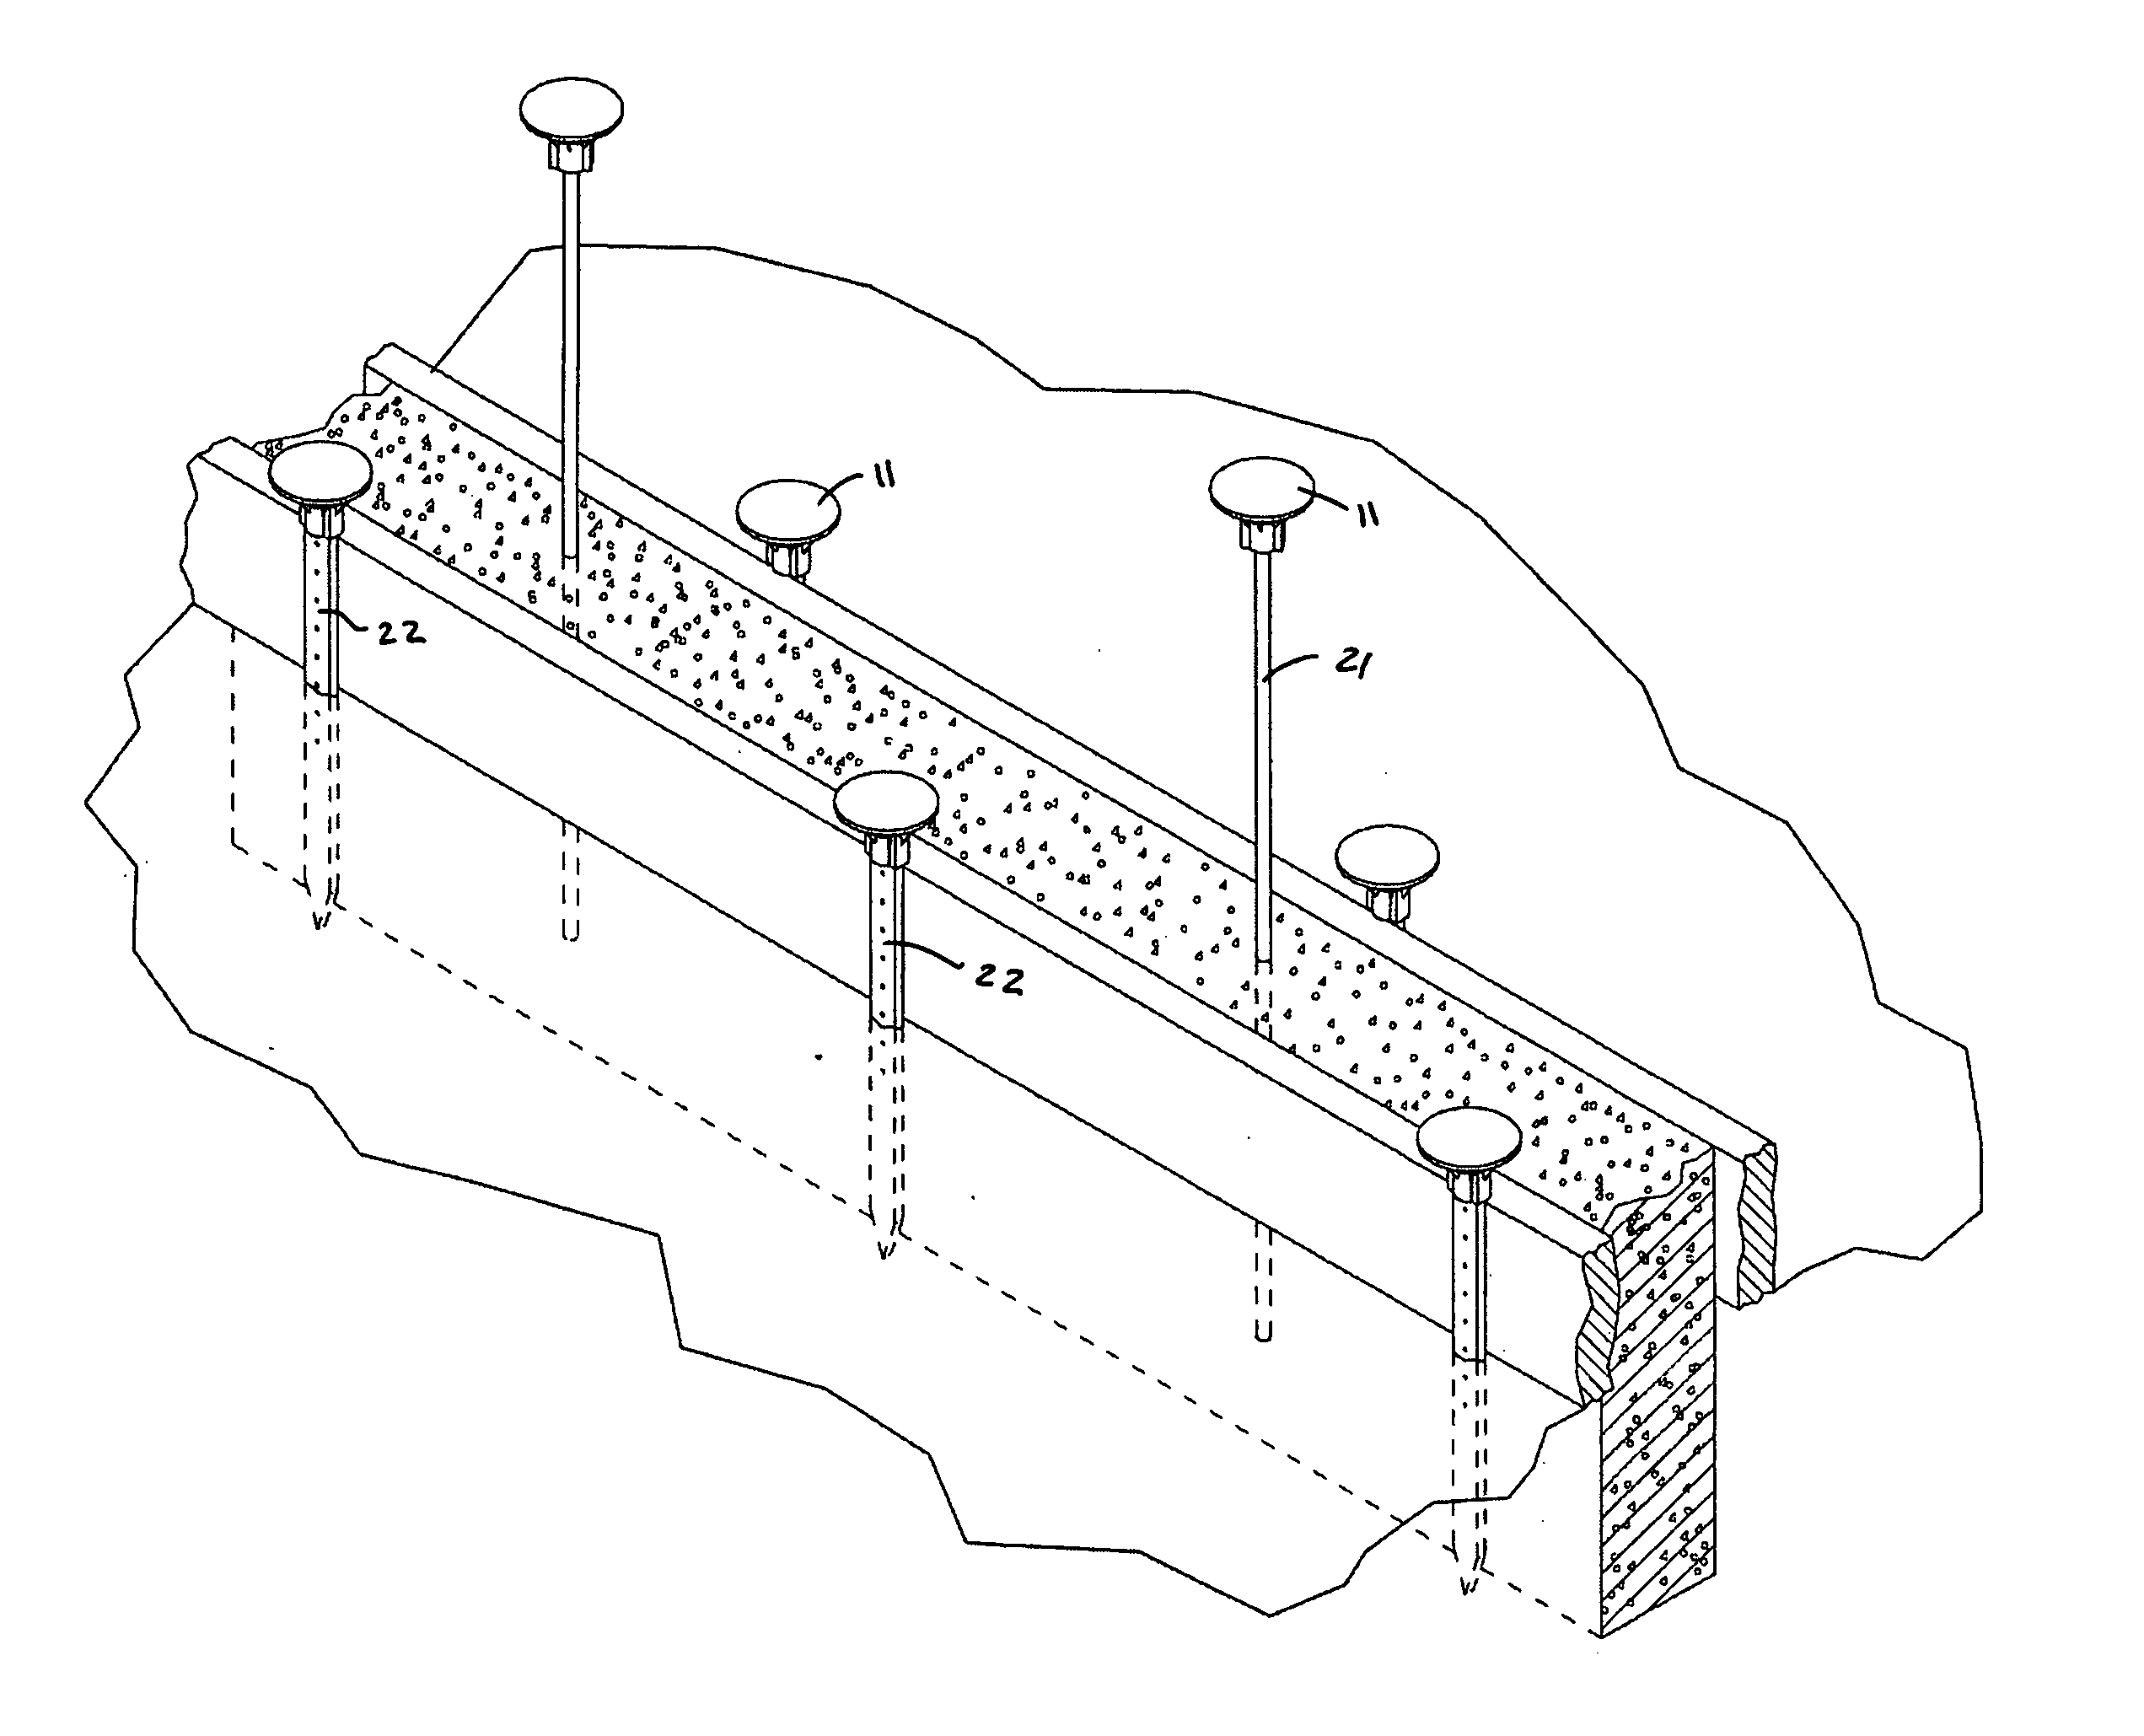 Safety caps for foundation rebar, stakes and anchor bolts and methods of use